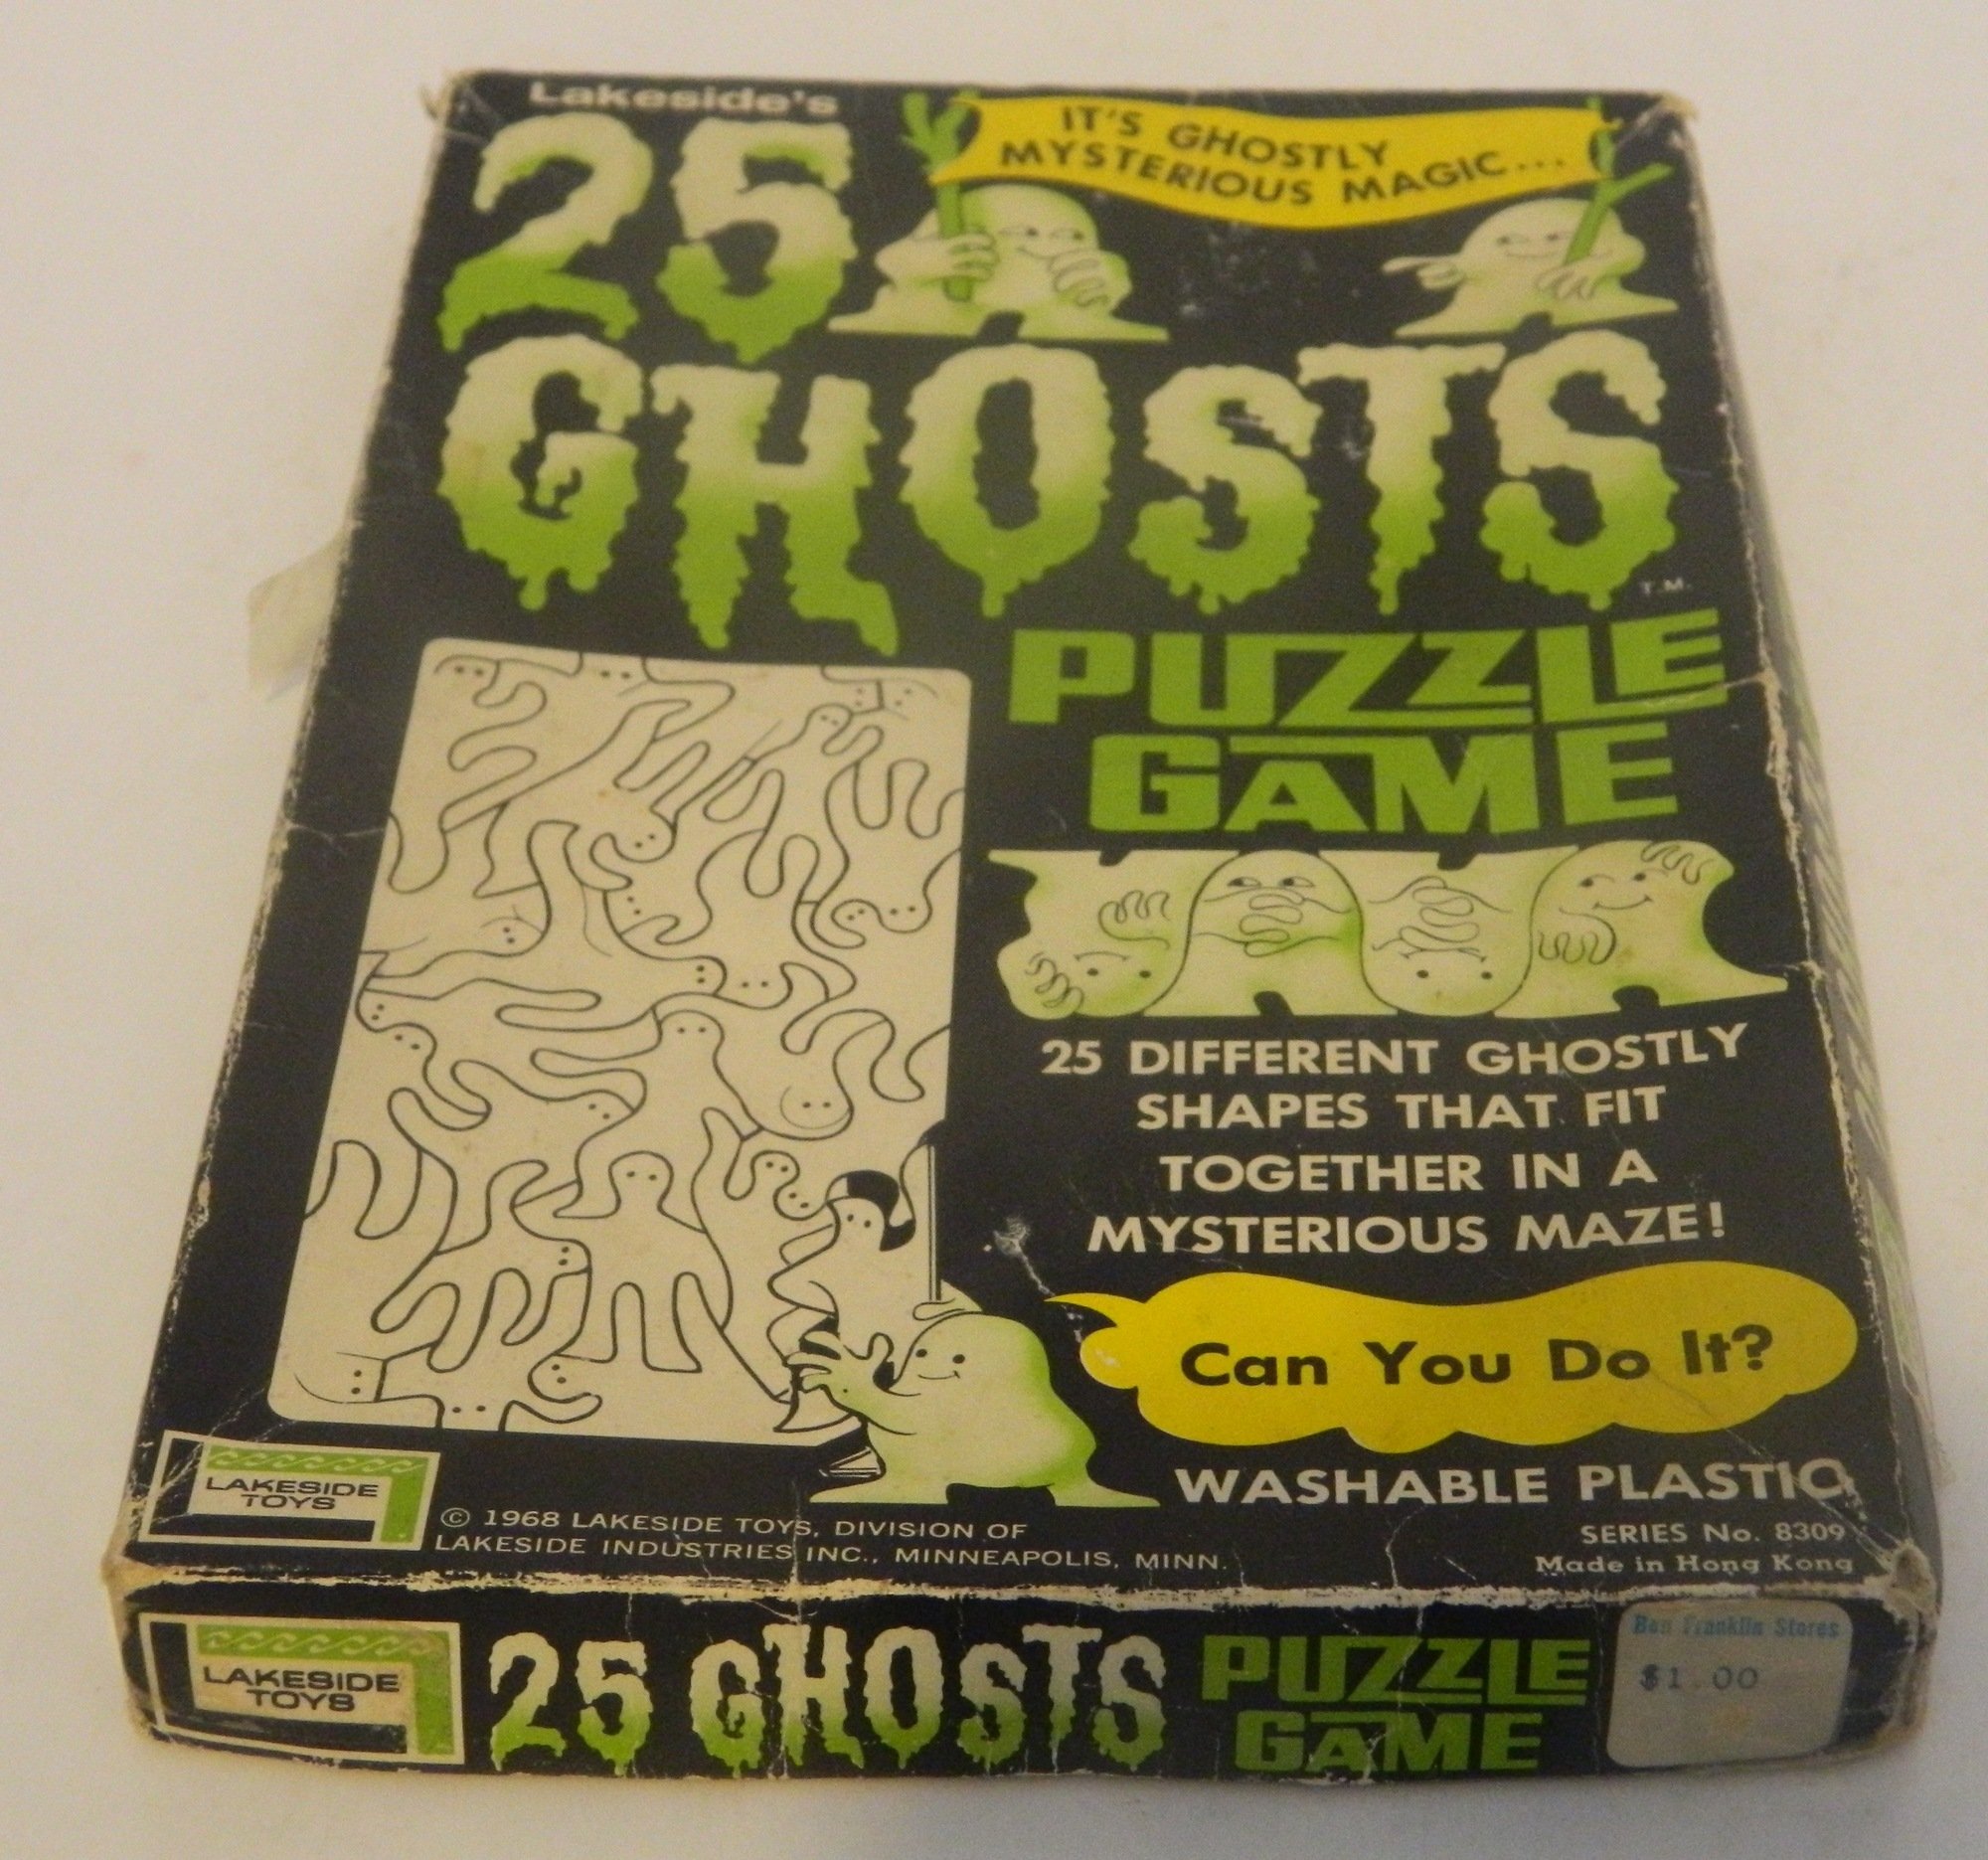 Puzzled: 25 Ghosts Puzzle Game